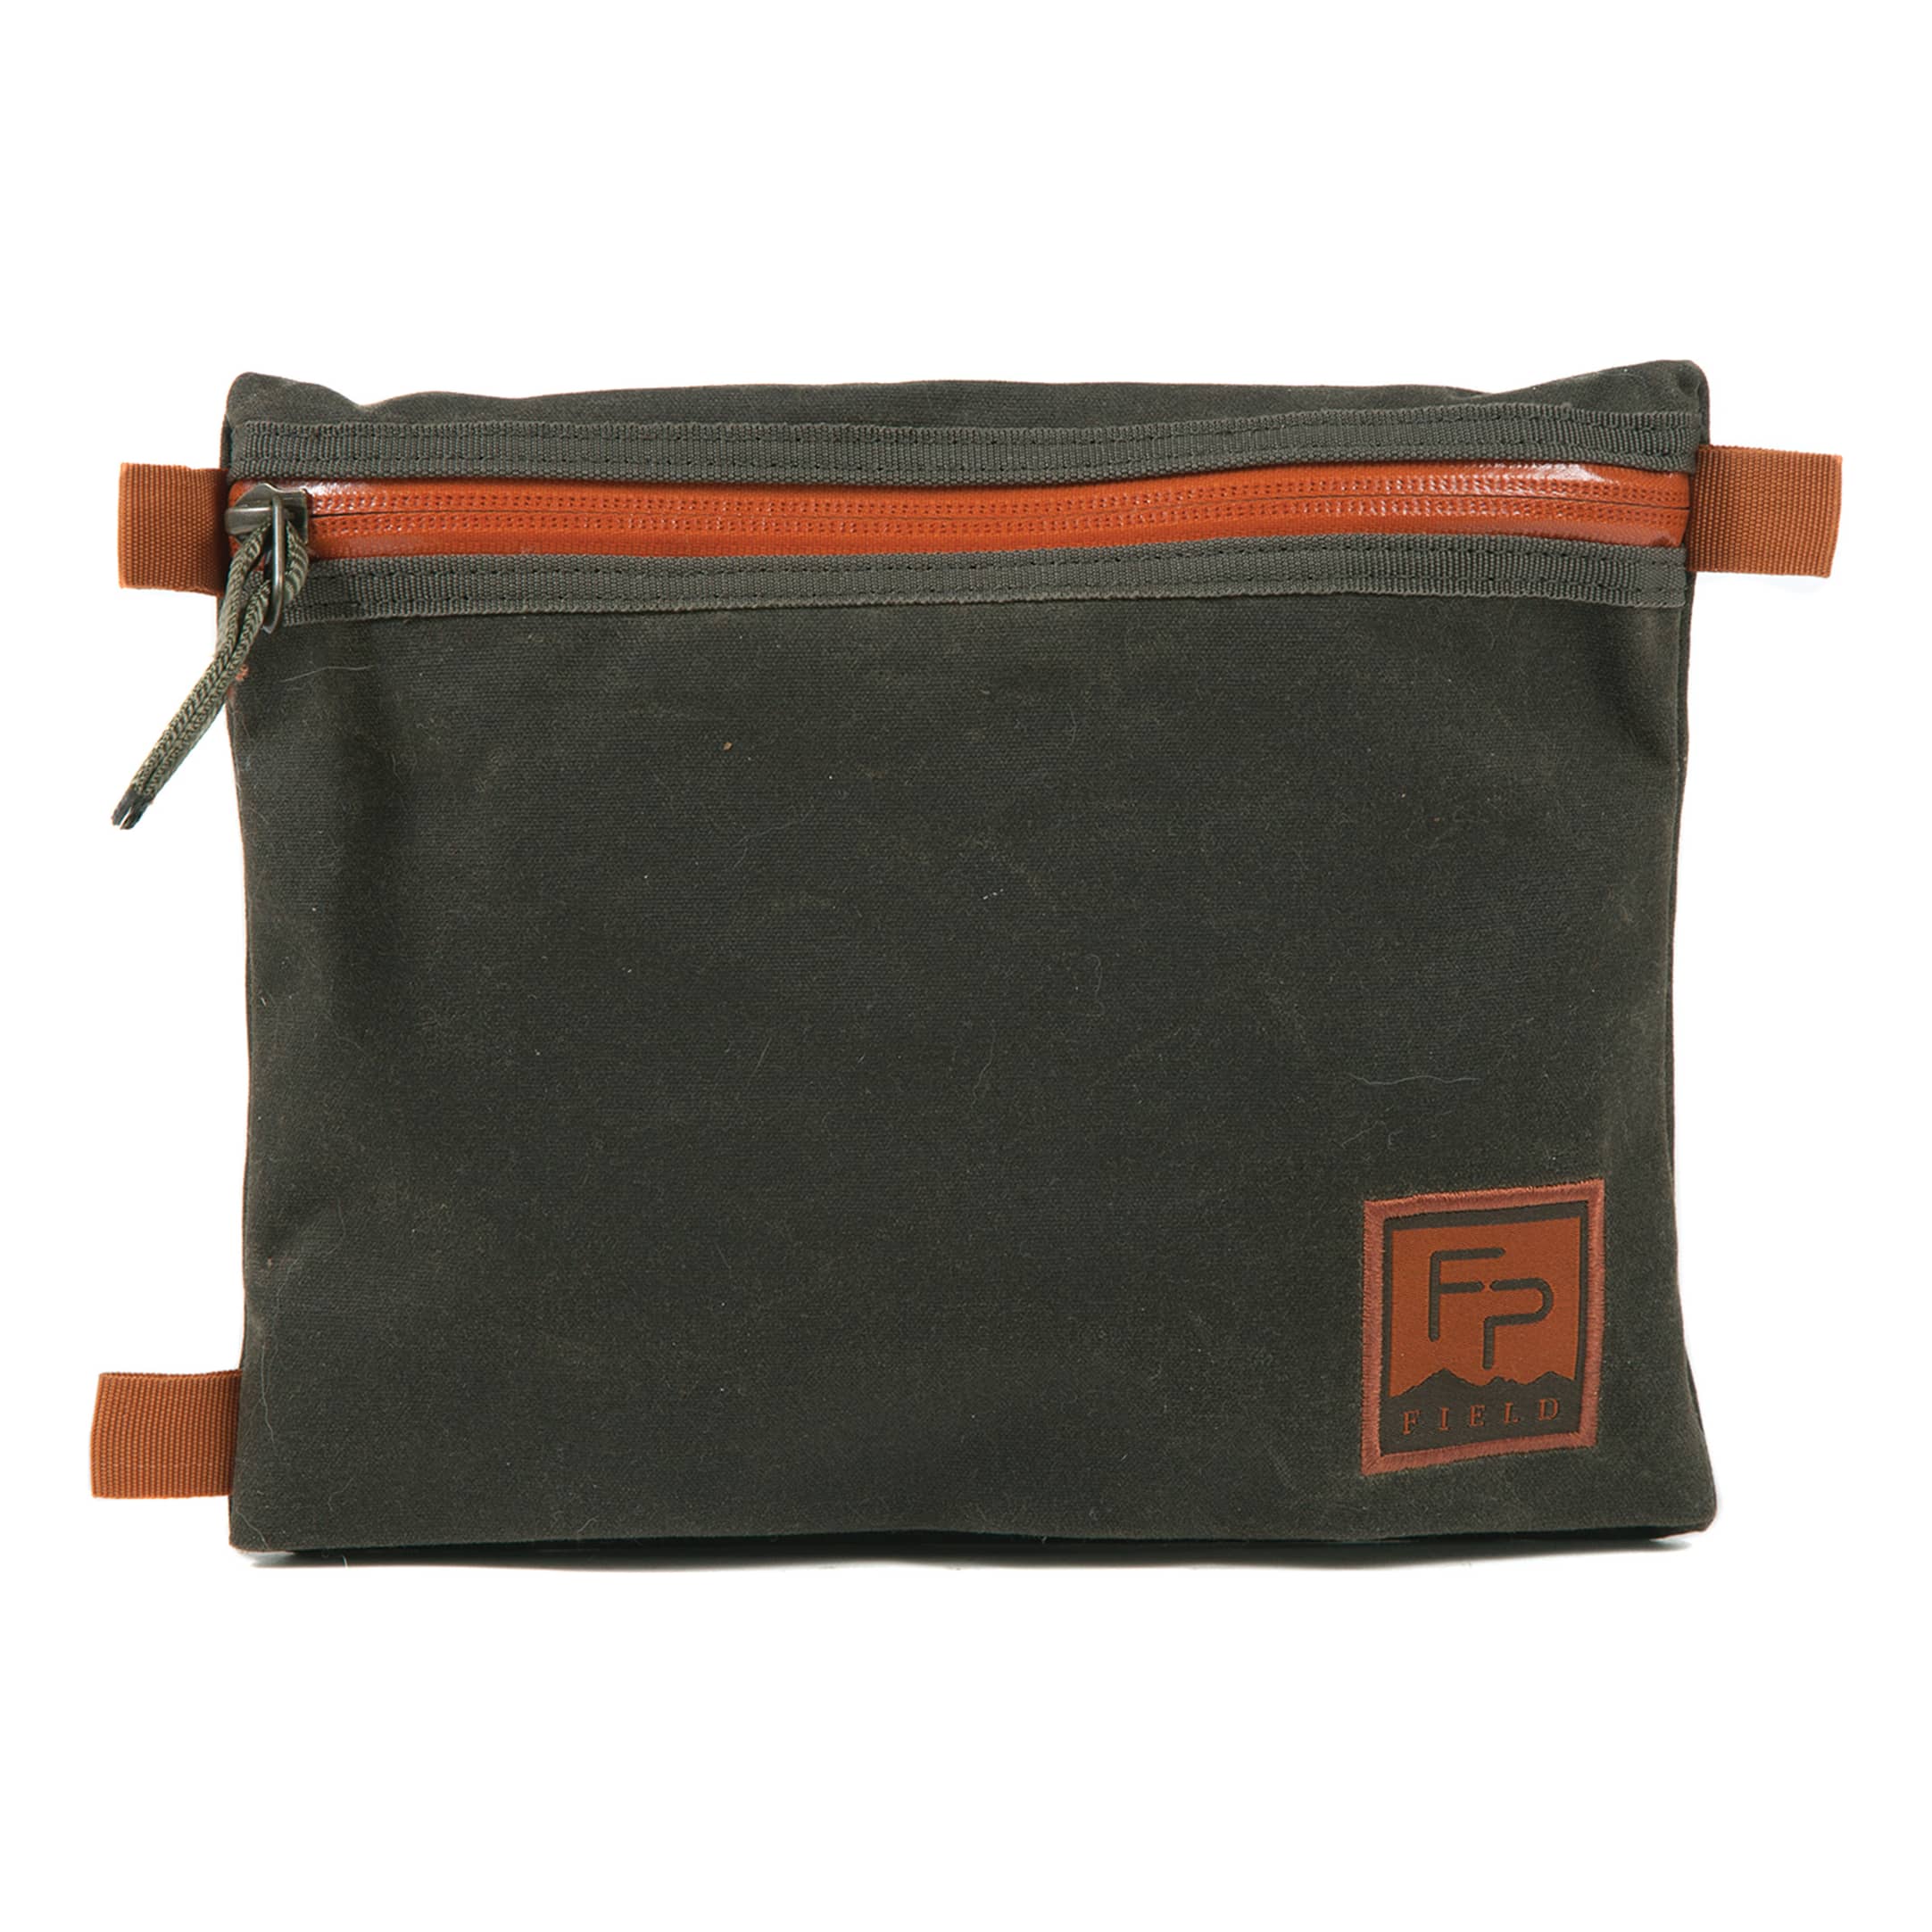 Fishpond® Eagles Nest Travel Pouch